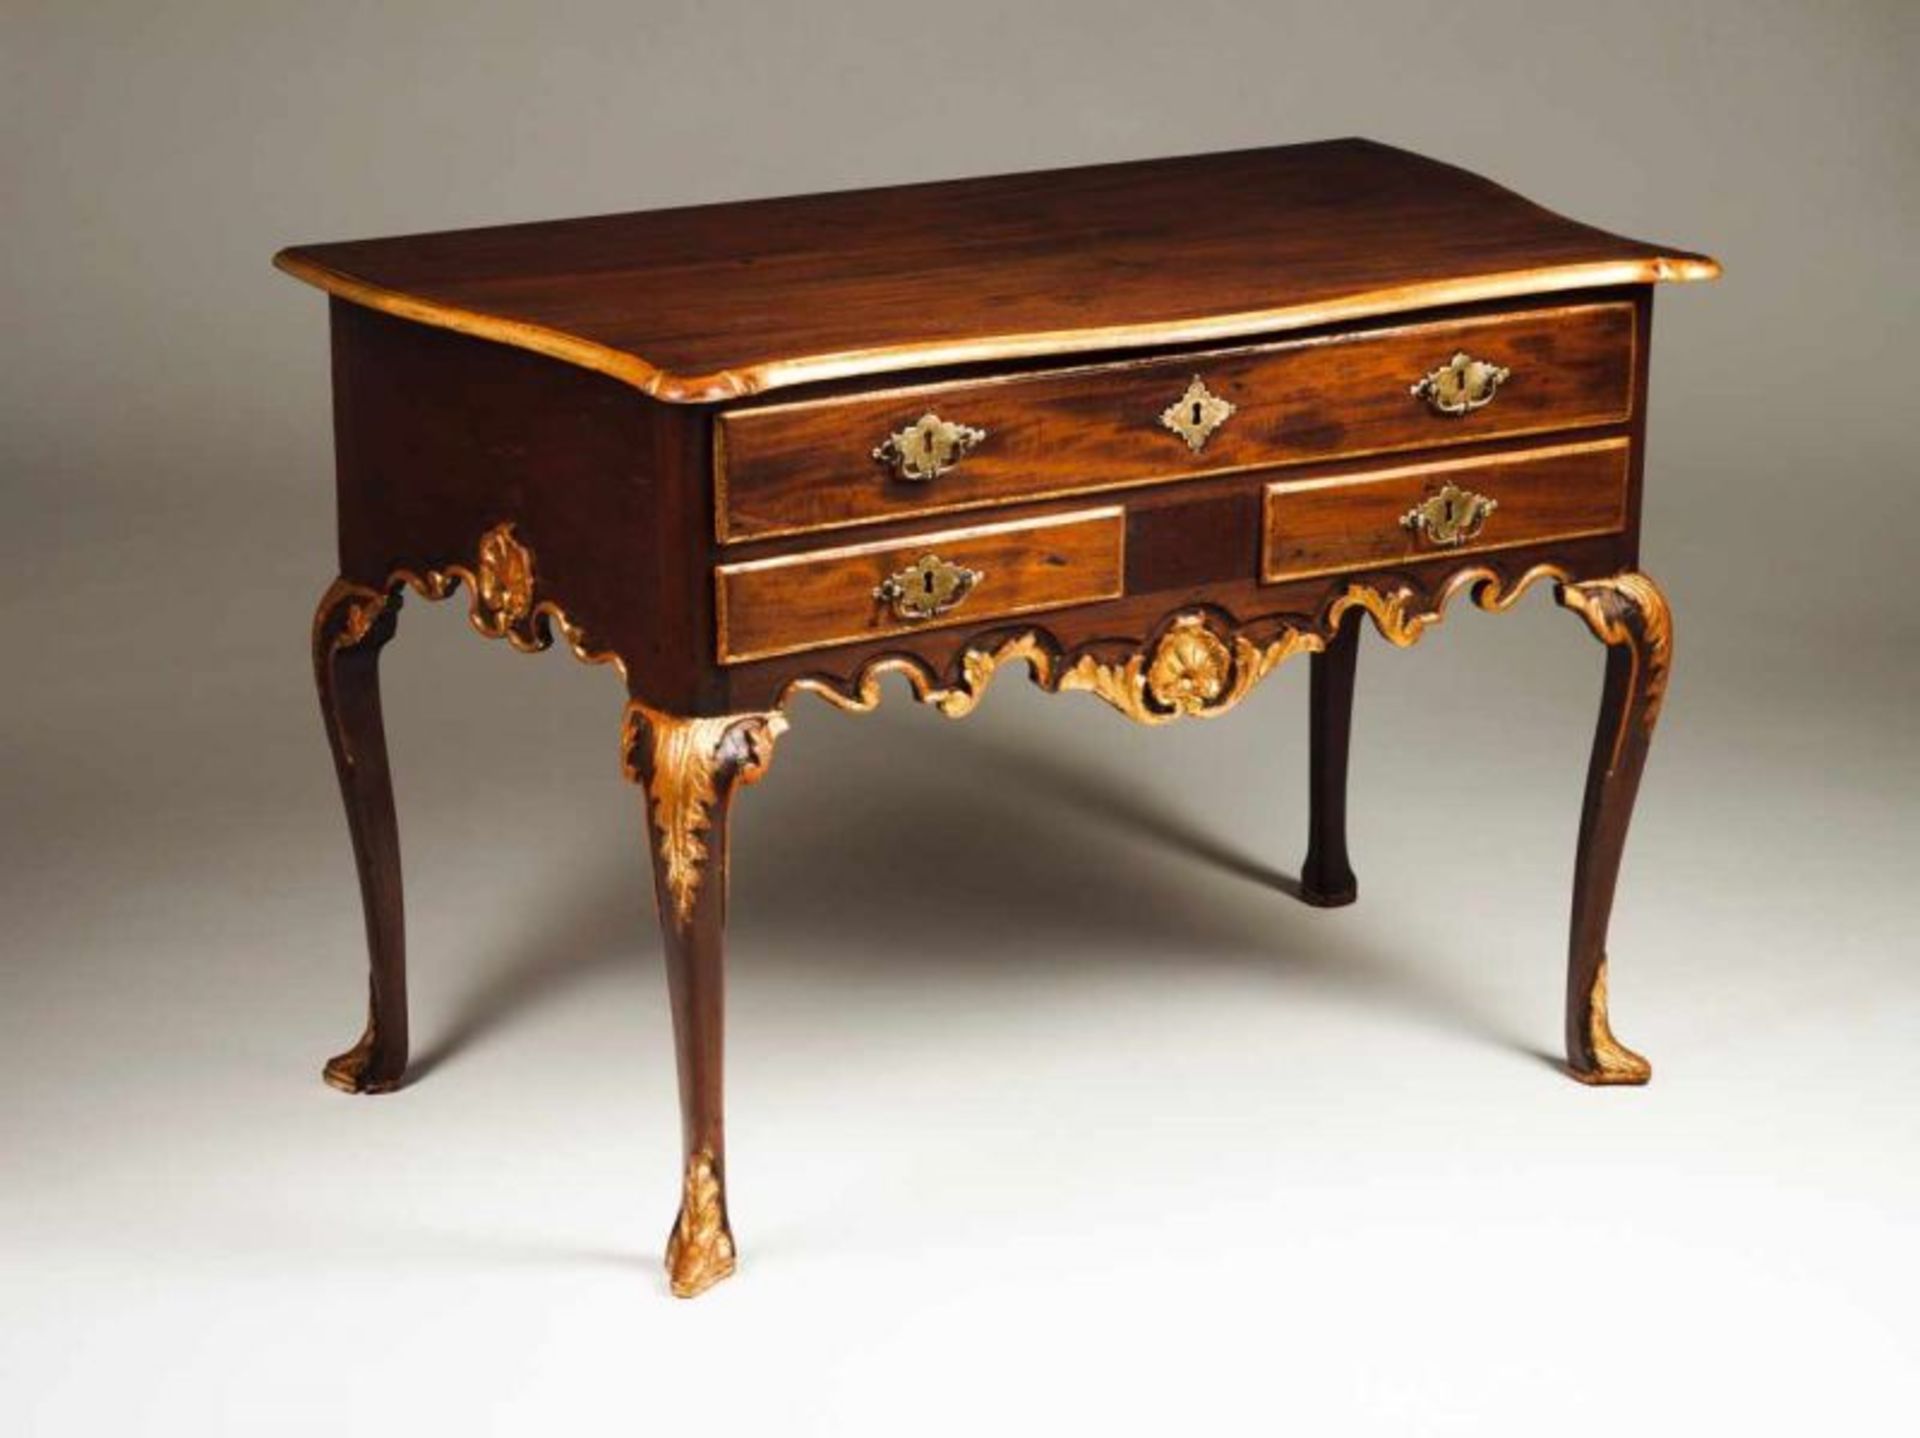 A D. João V (1707-1750) side table Walnut with gildings Three drawers Scalloped, carved and gilt